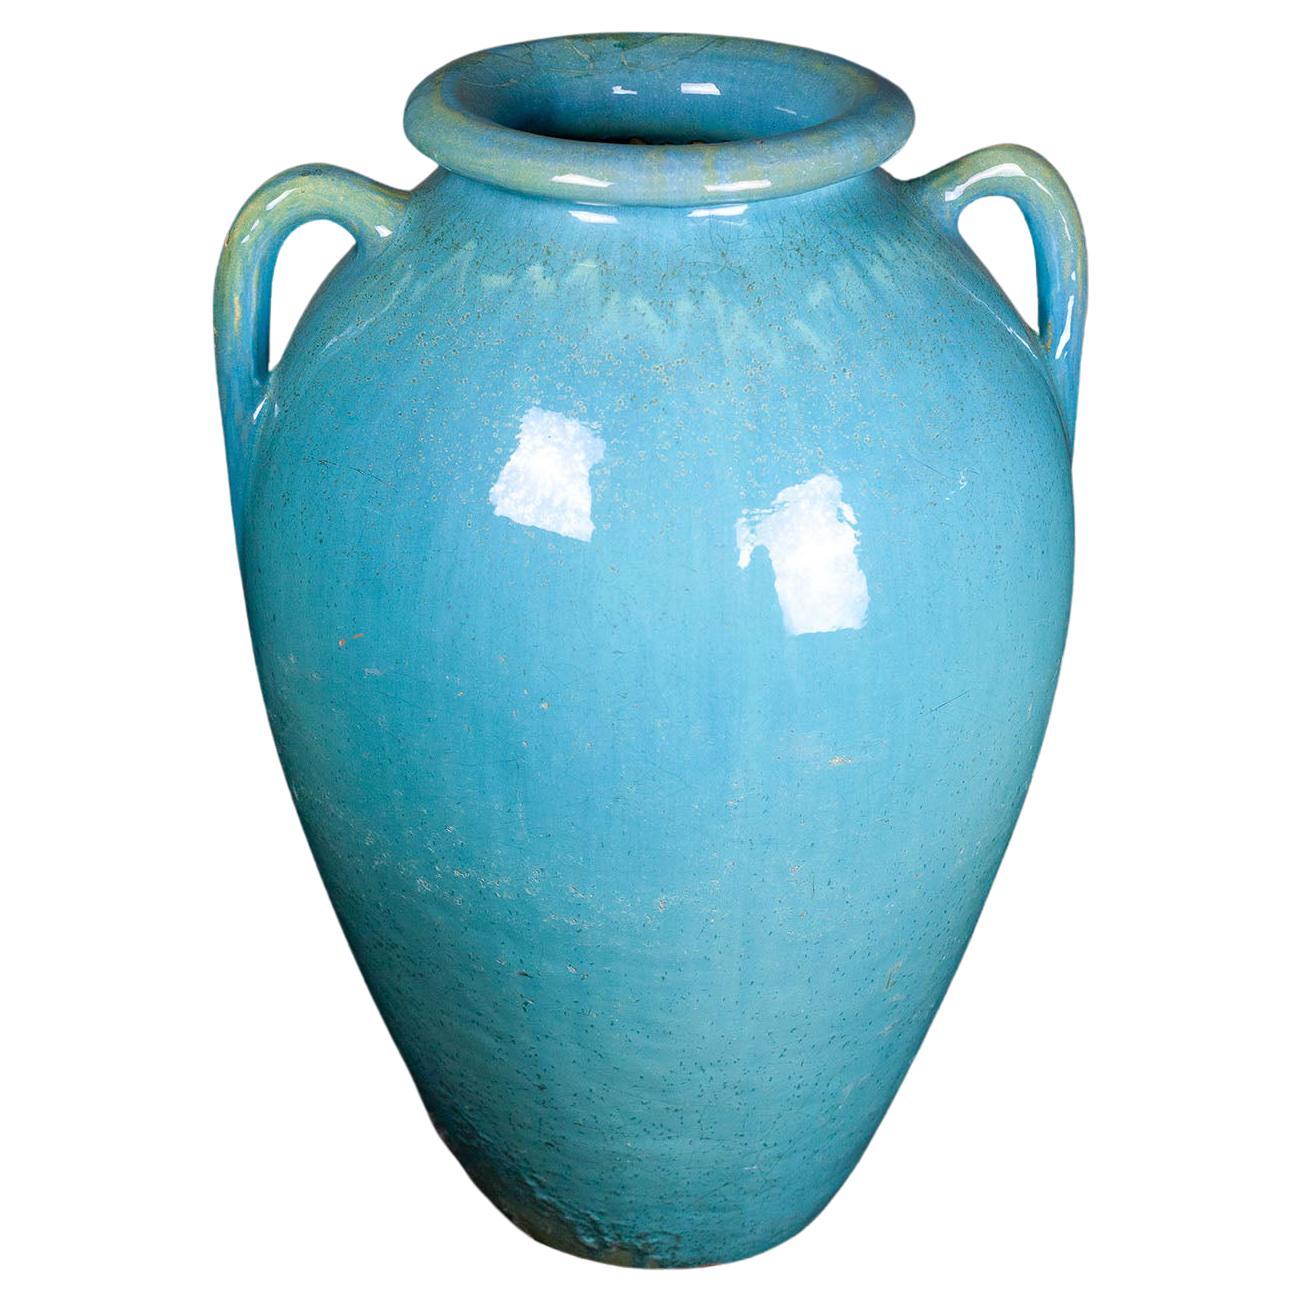 Galloway Garden Urn / Vessel / Pottery  For Sale